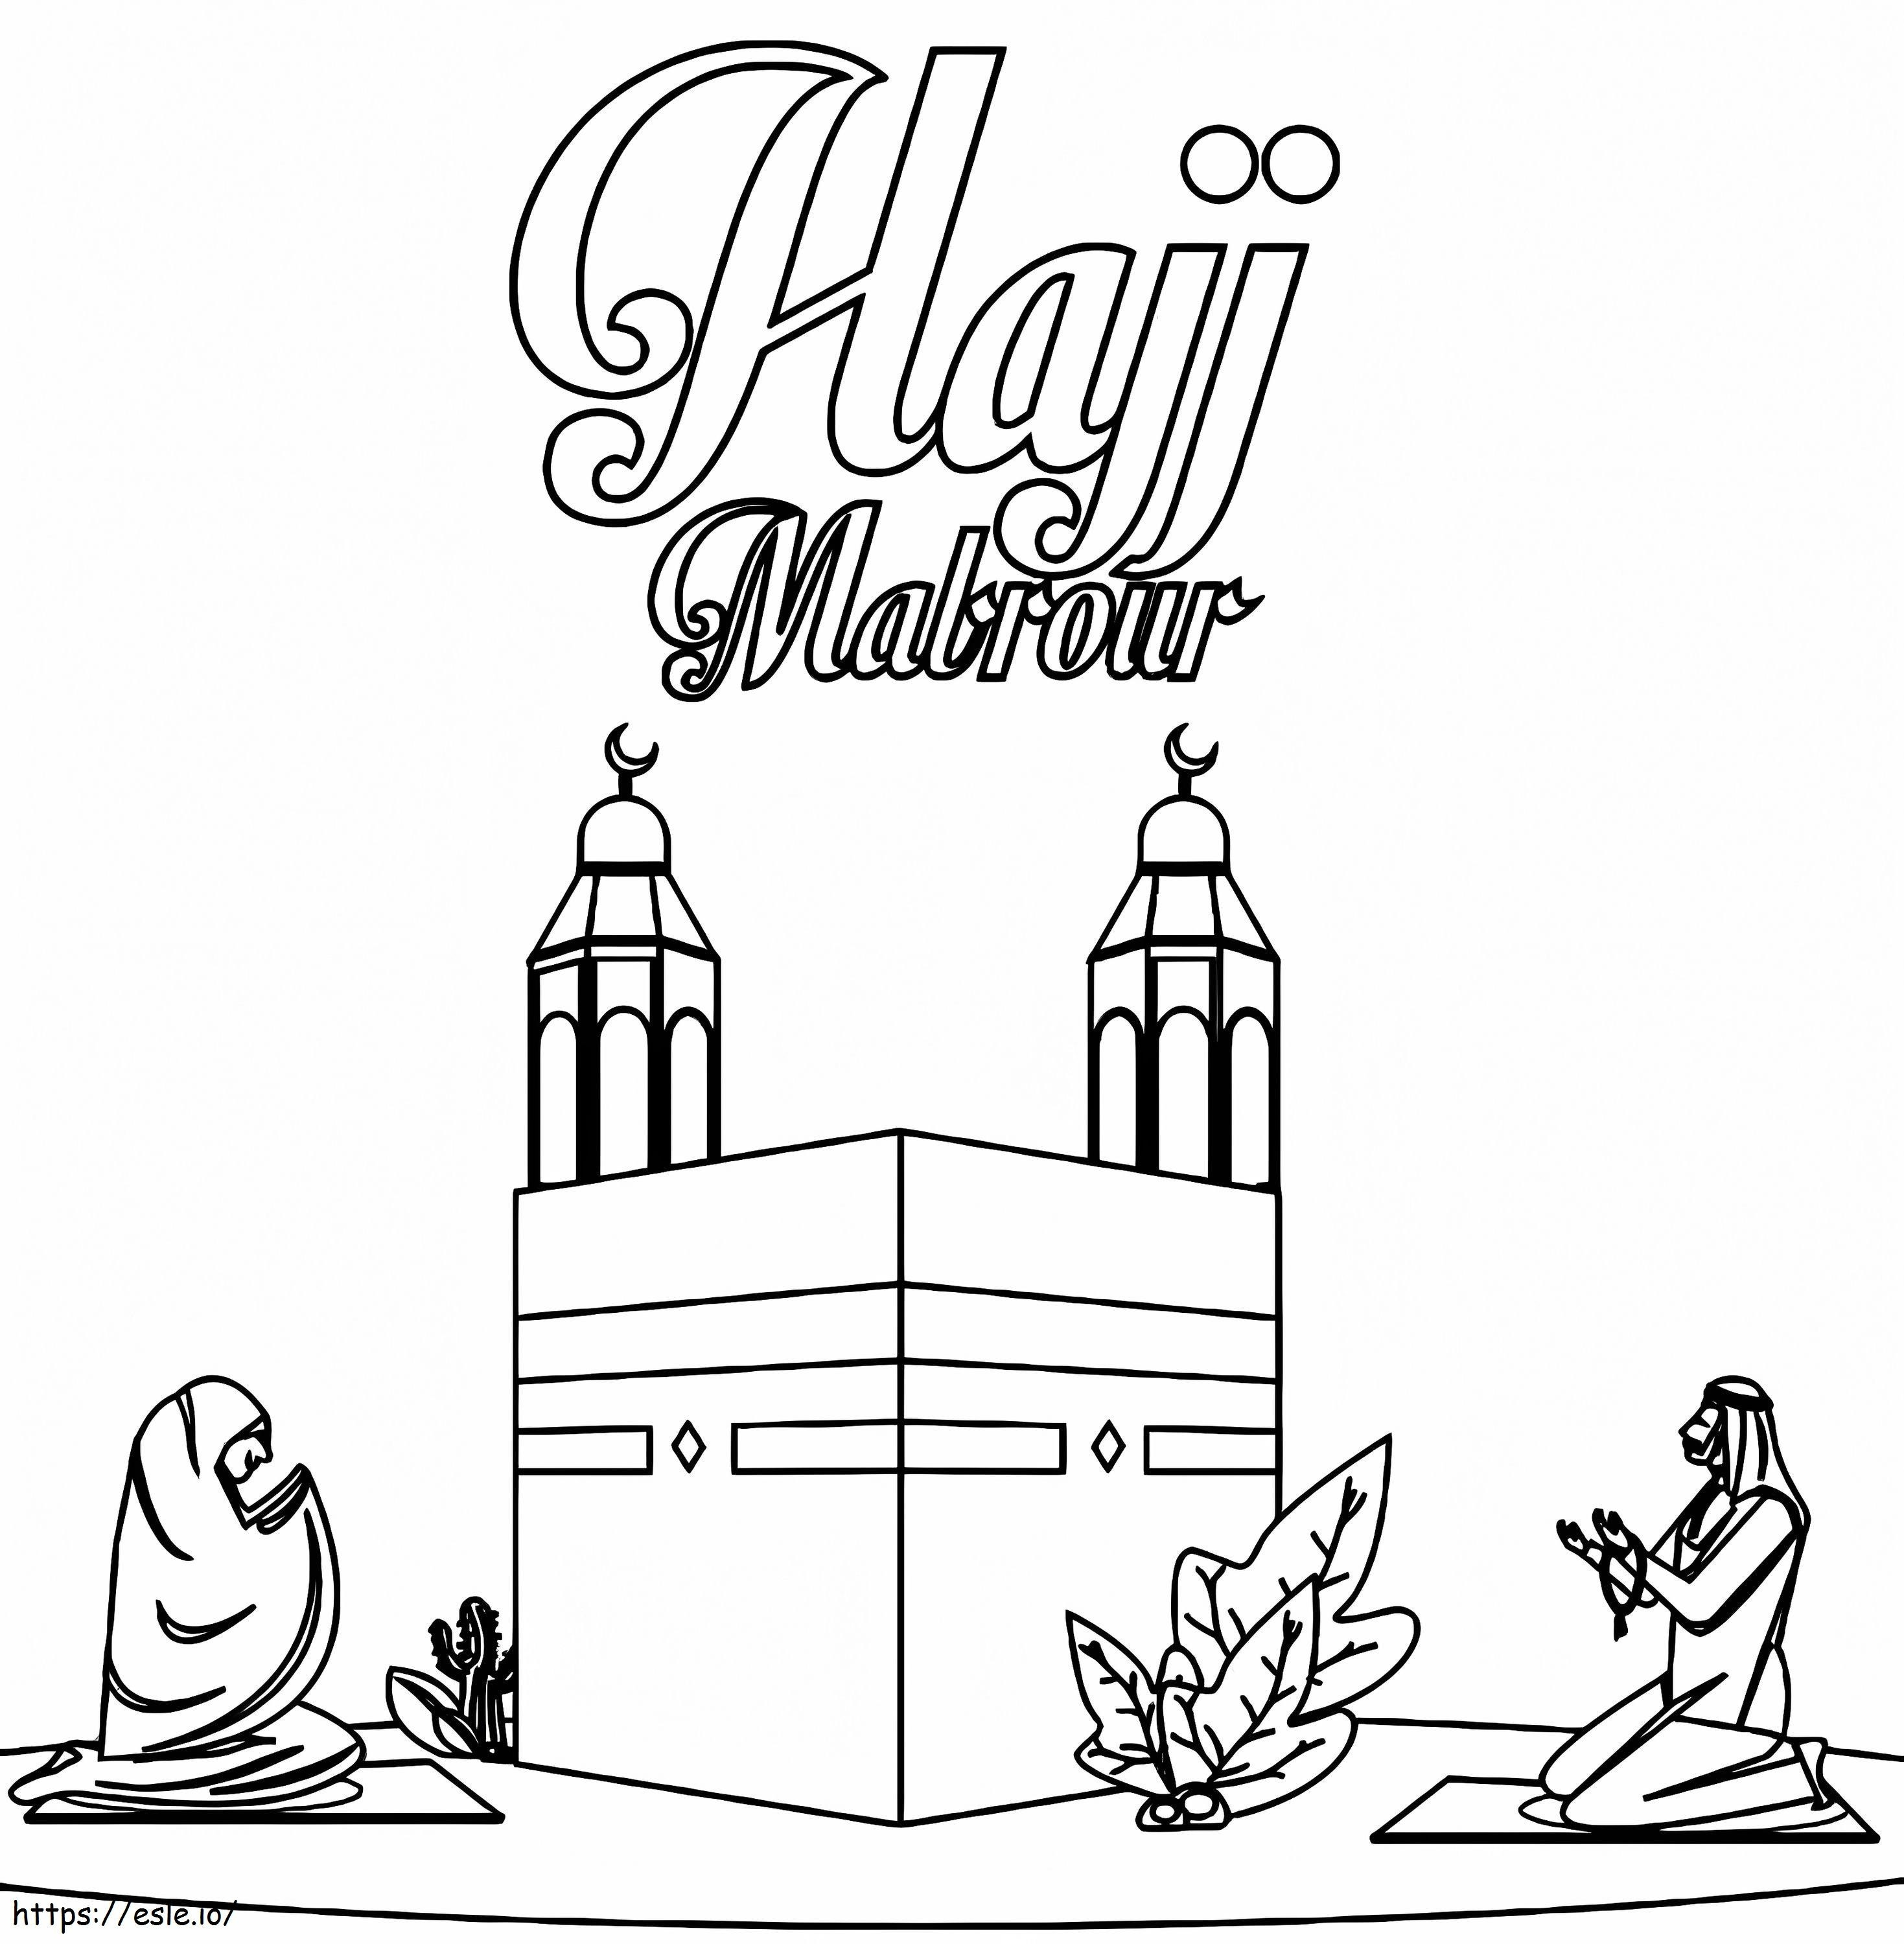 Hajj Mabrour coloring page